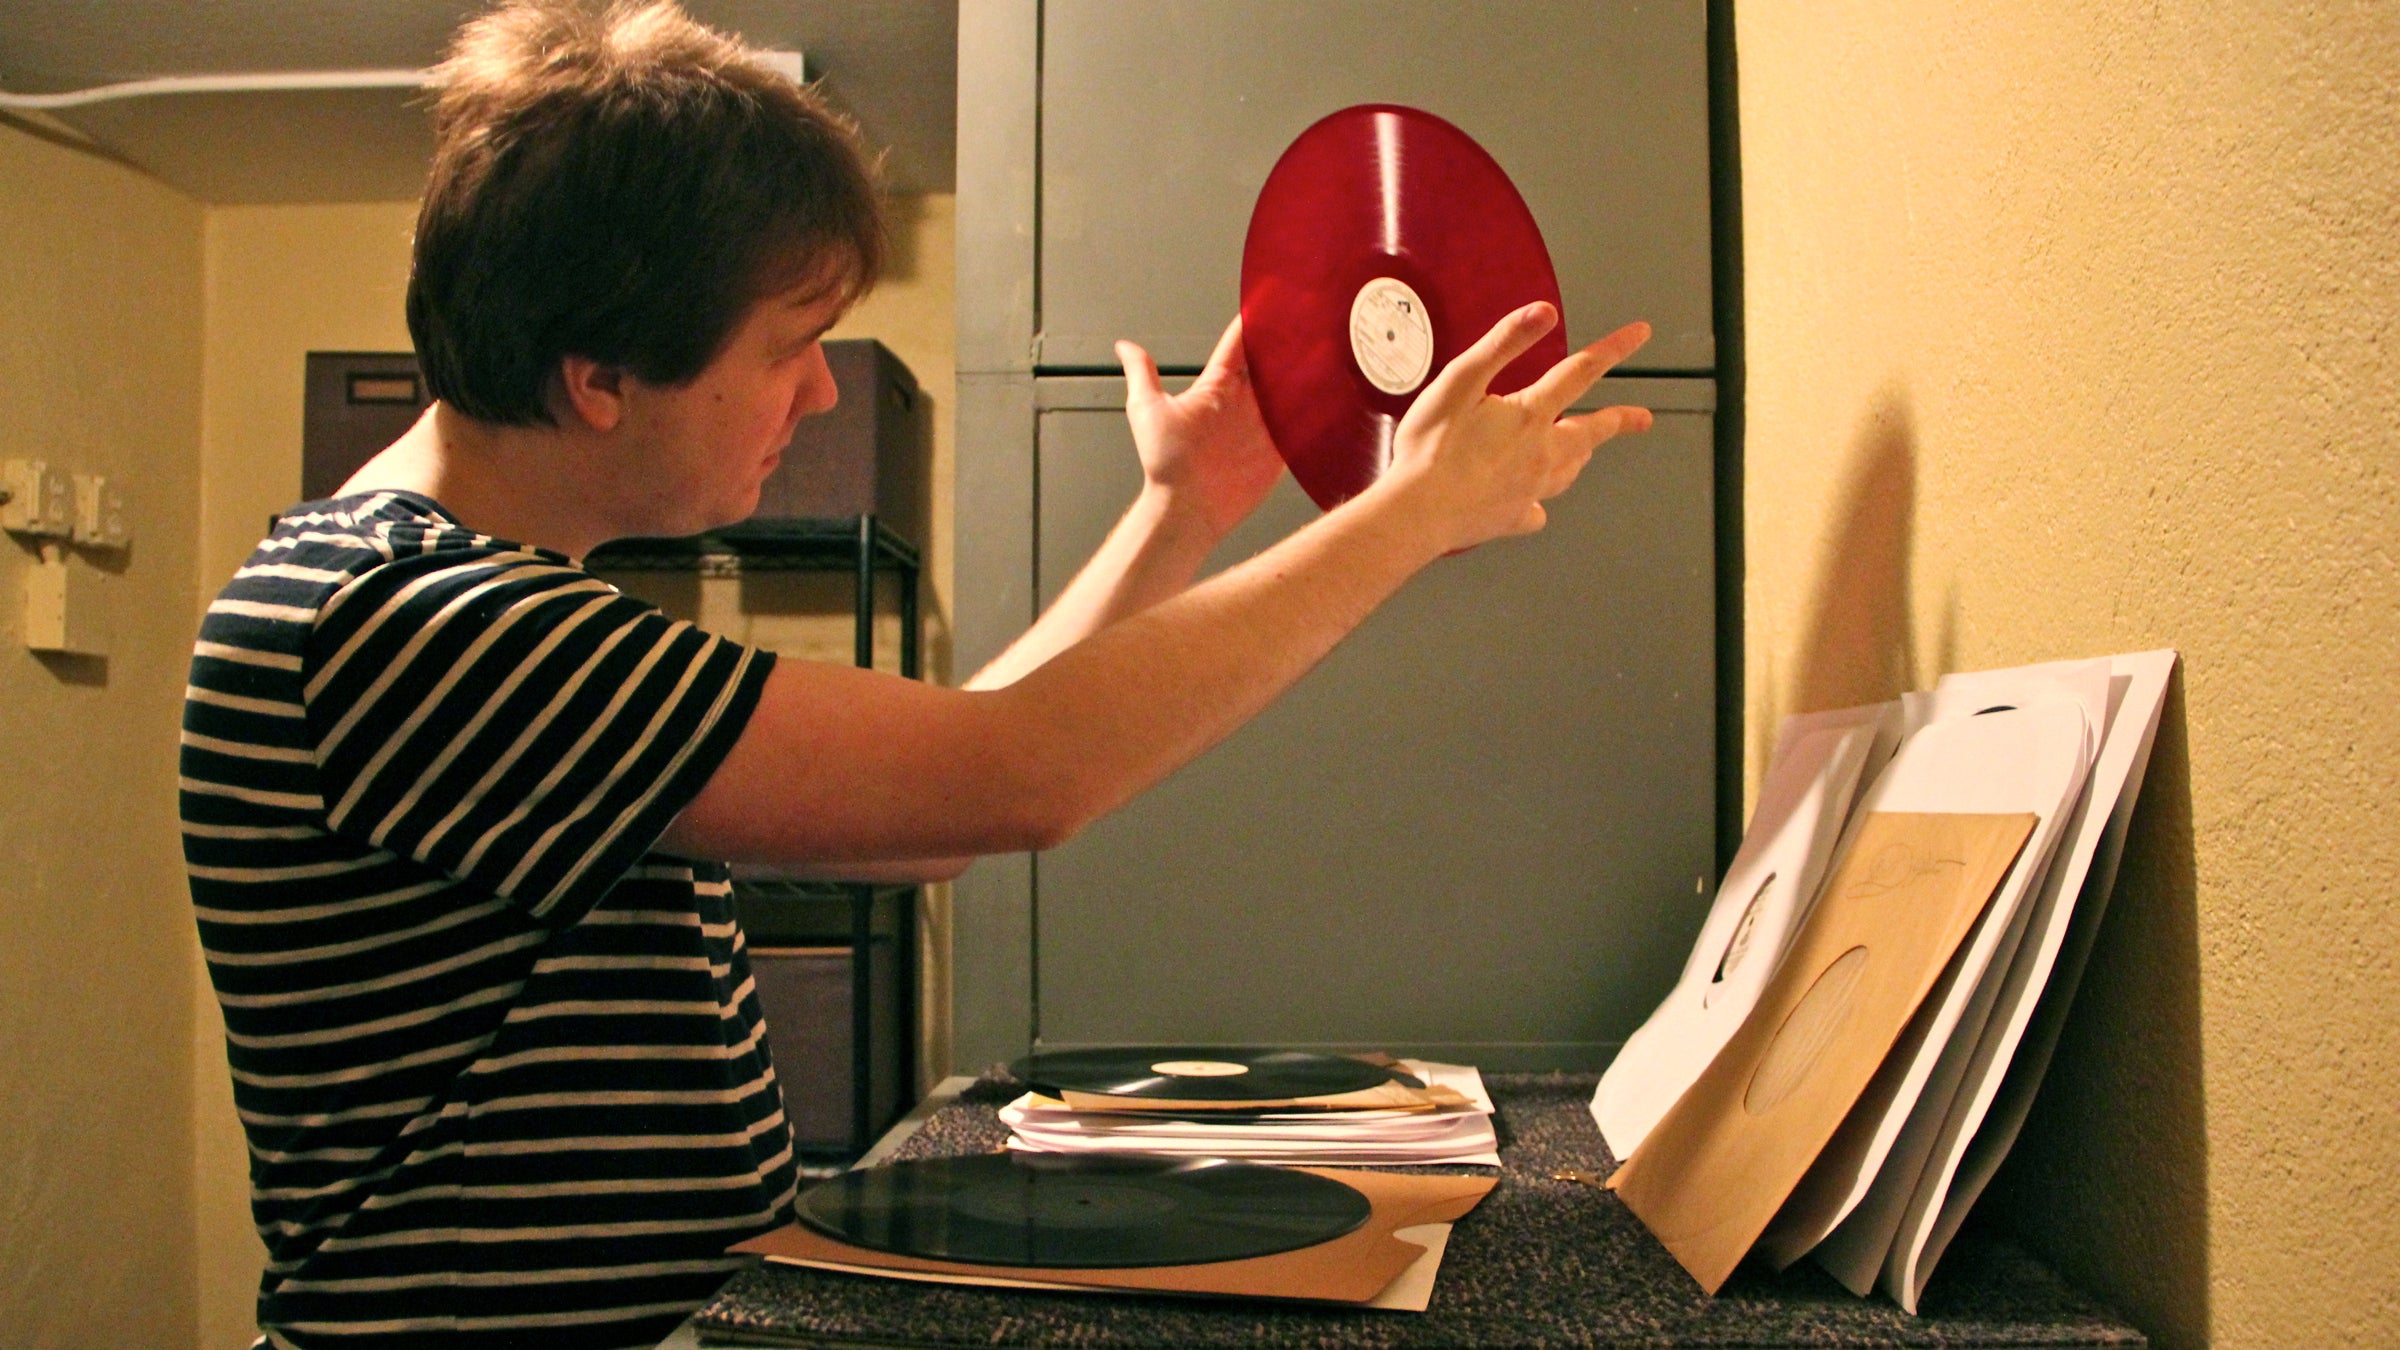  Graham Alexander looks through some of the old Victor records stored in the Vault, a bank building in Berlin, N.J., that he has transformed into a recording studio. (Emma Lee/WHYY) 